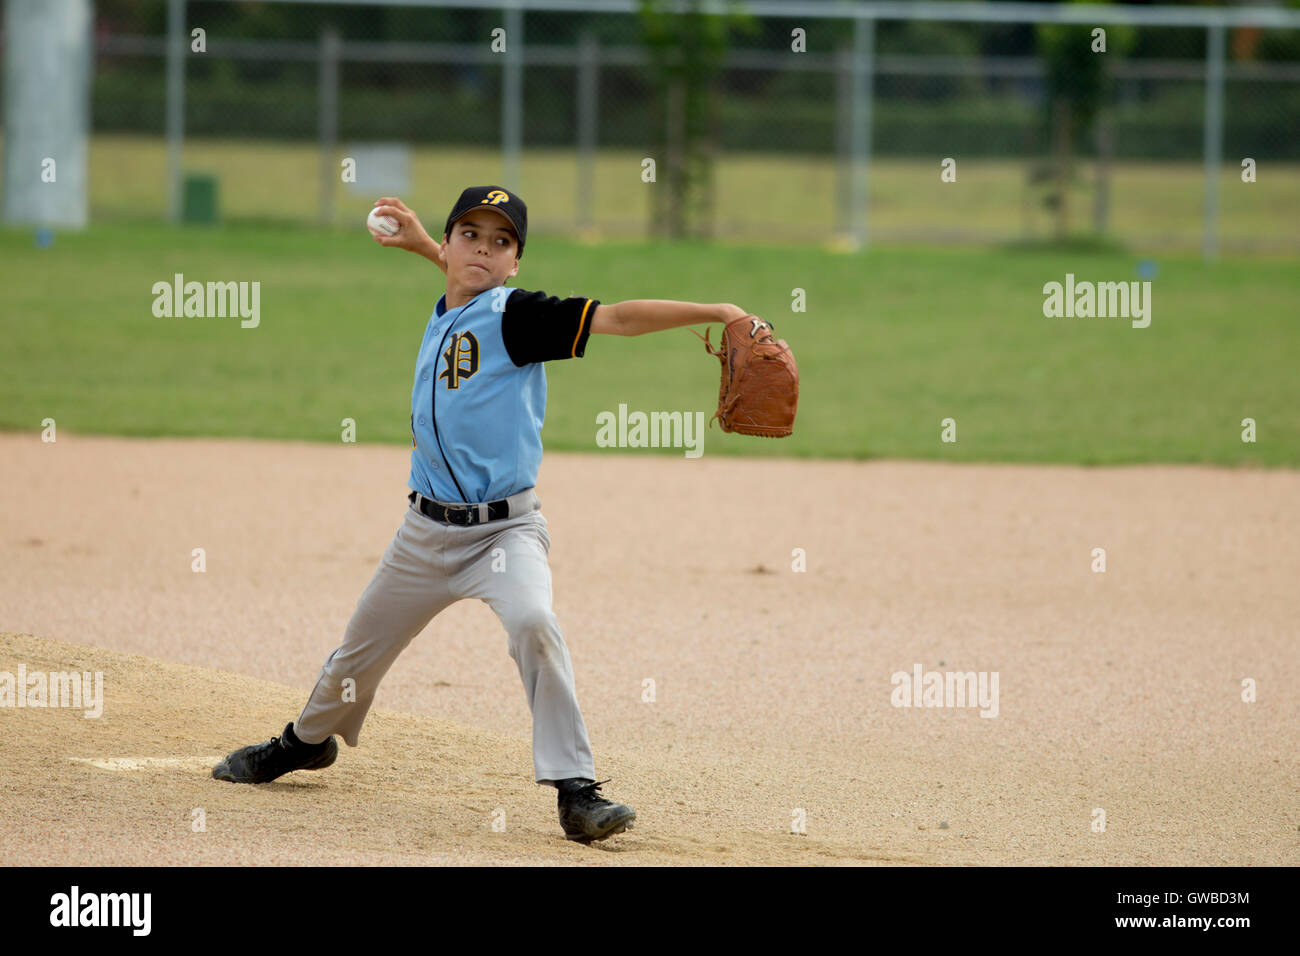 A teenage boy pitches during a baseball game in Cairns, Australia Stock Photo